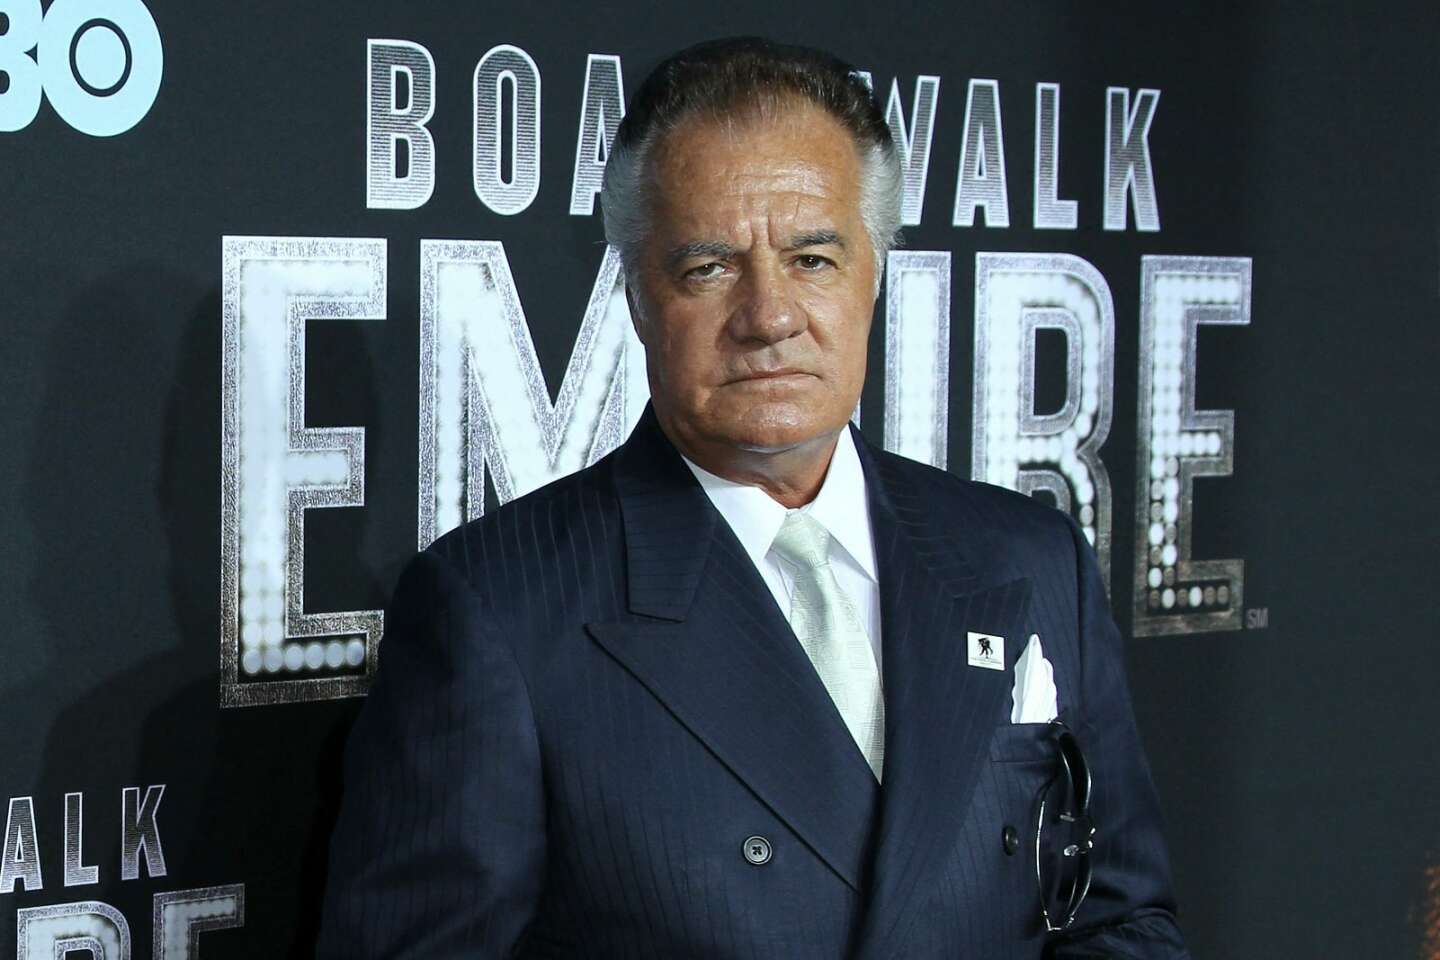 Mort was written by Tony Sirico, star of “Les Sopranos.”